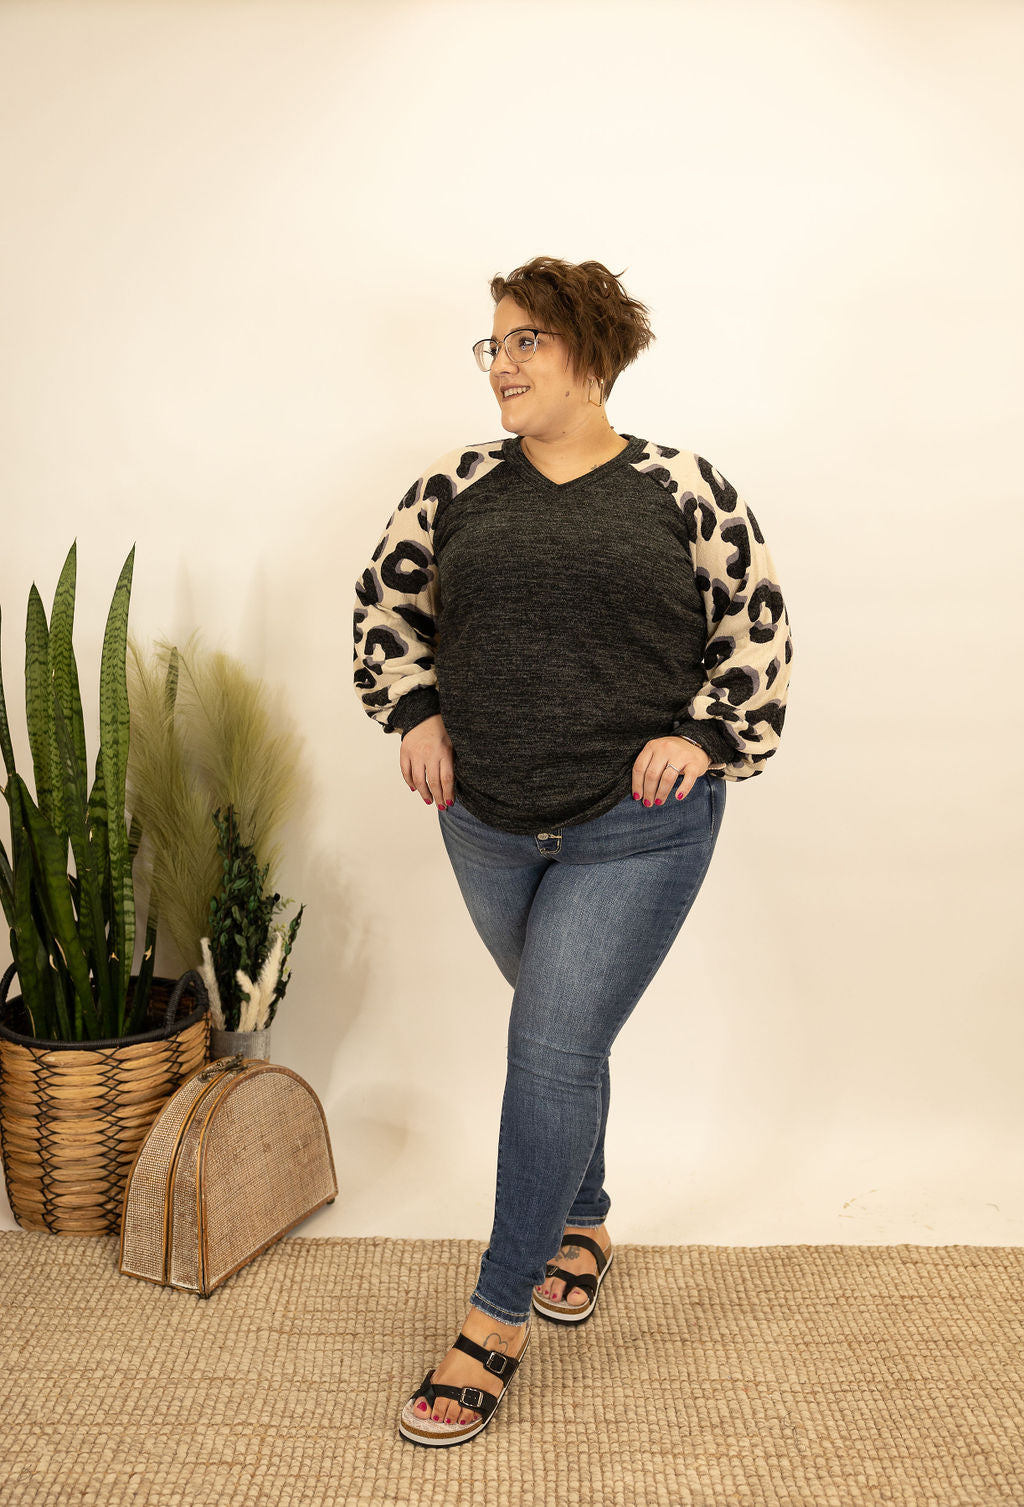 Knit Contrast Top With Cheetah Sleeves - AnnRose Boutique